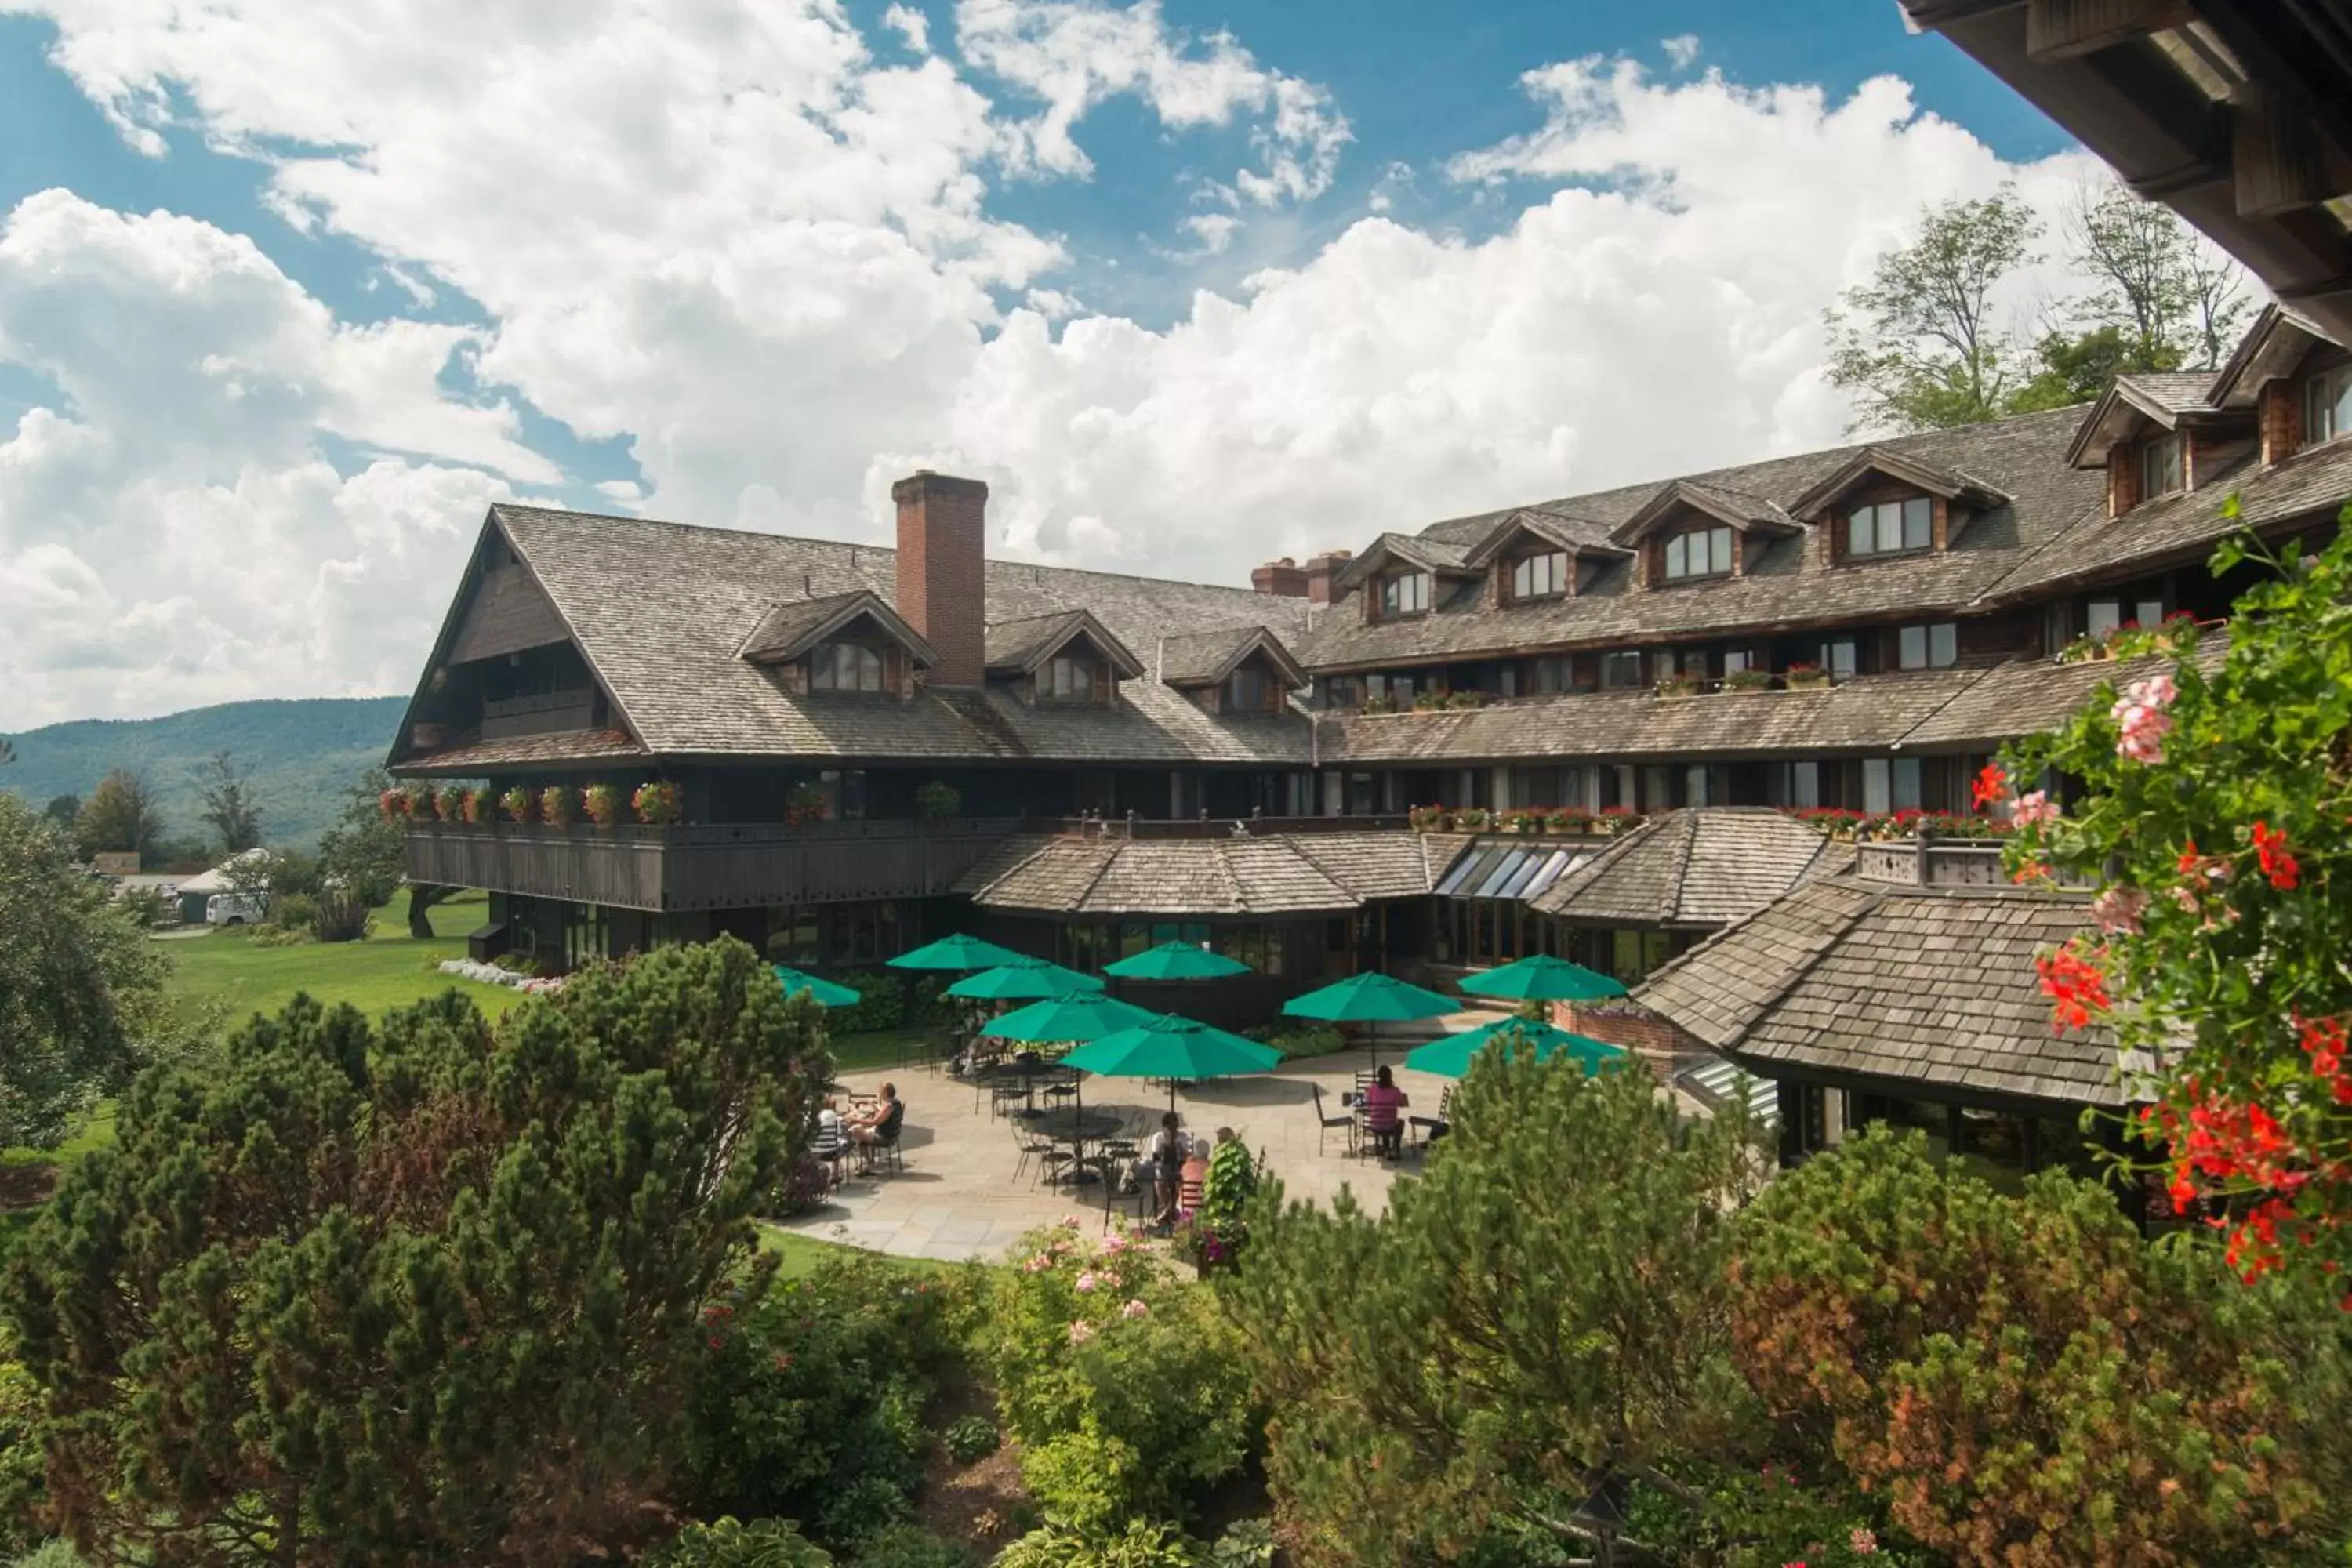 Bird's eye view, Property Building in Trapp Family Lodge